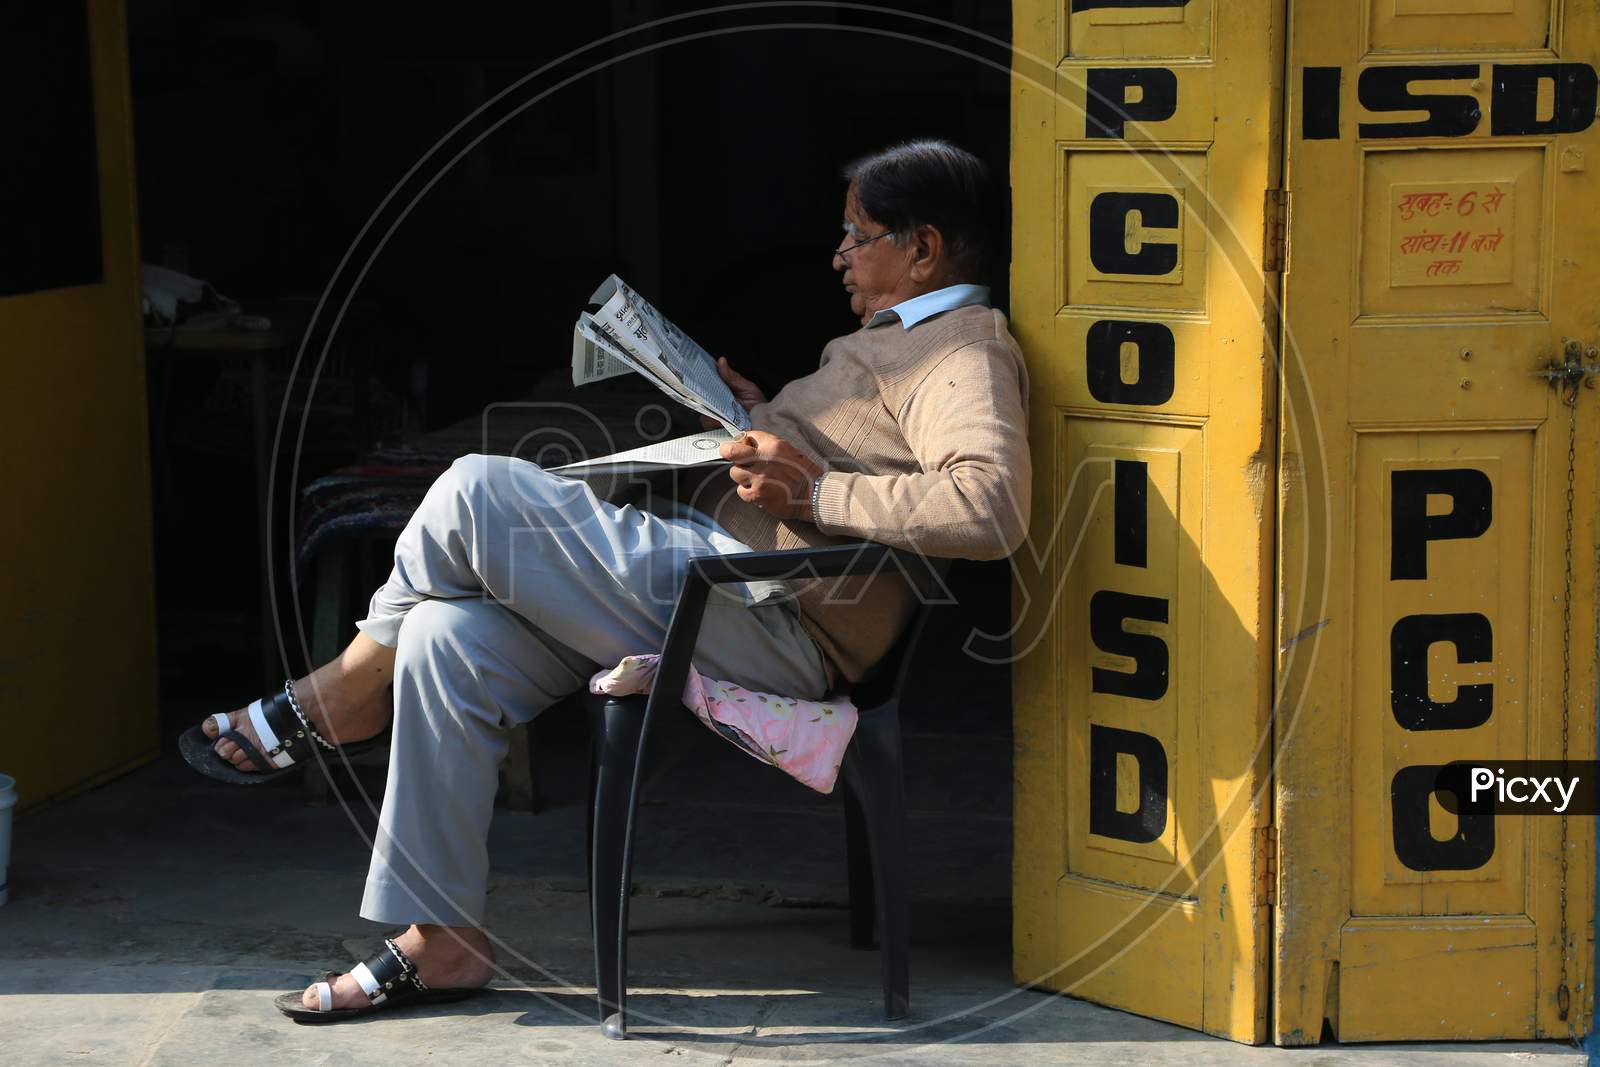 Indian Old Man Reading Newspapers outside a Telephone booth